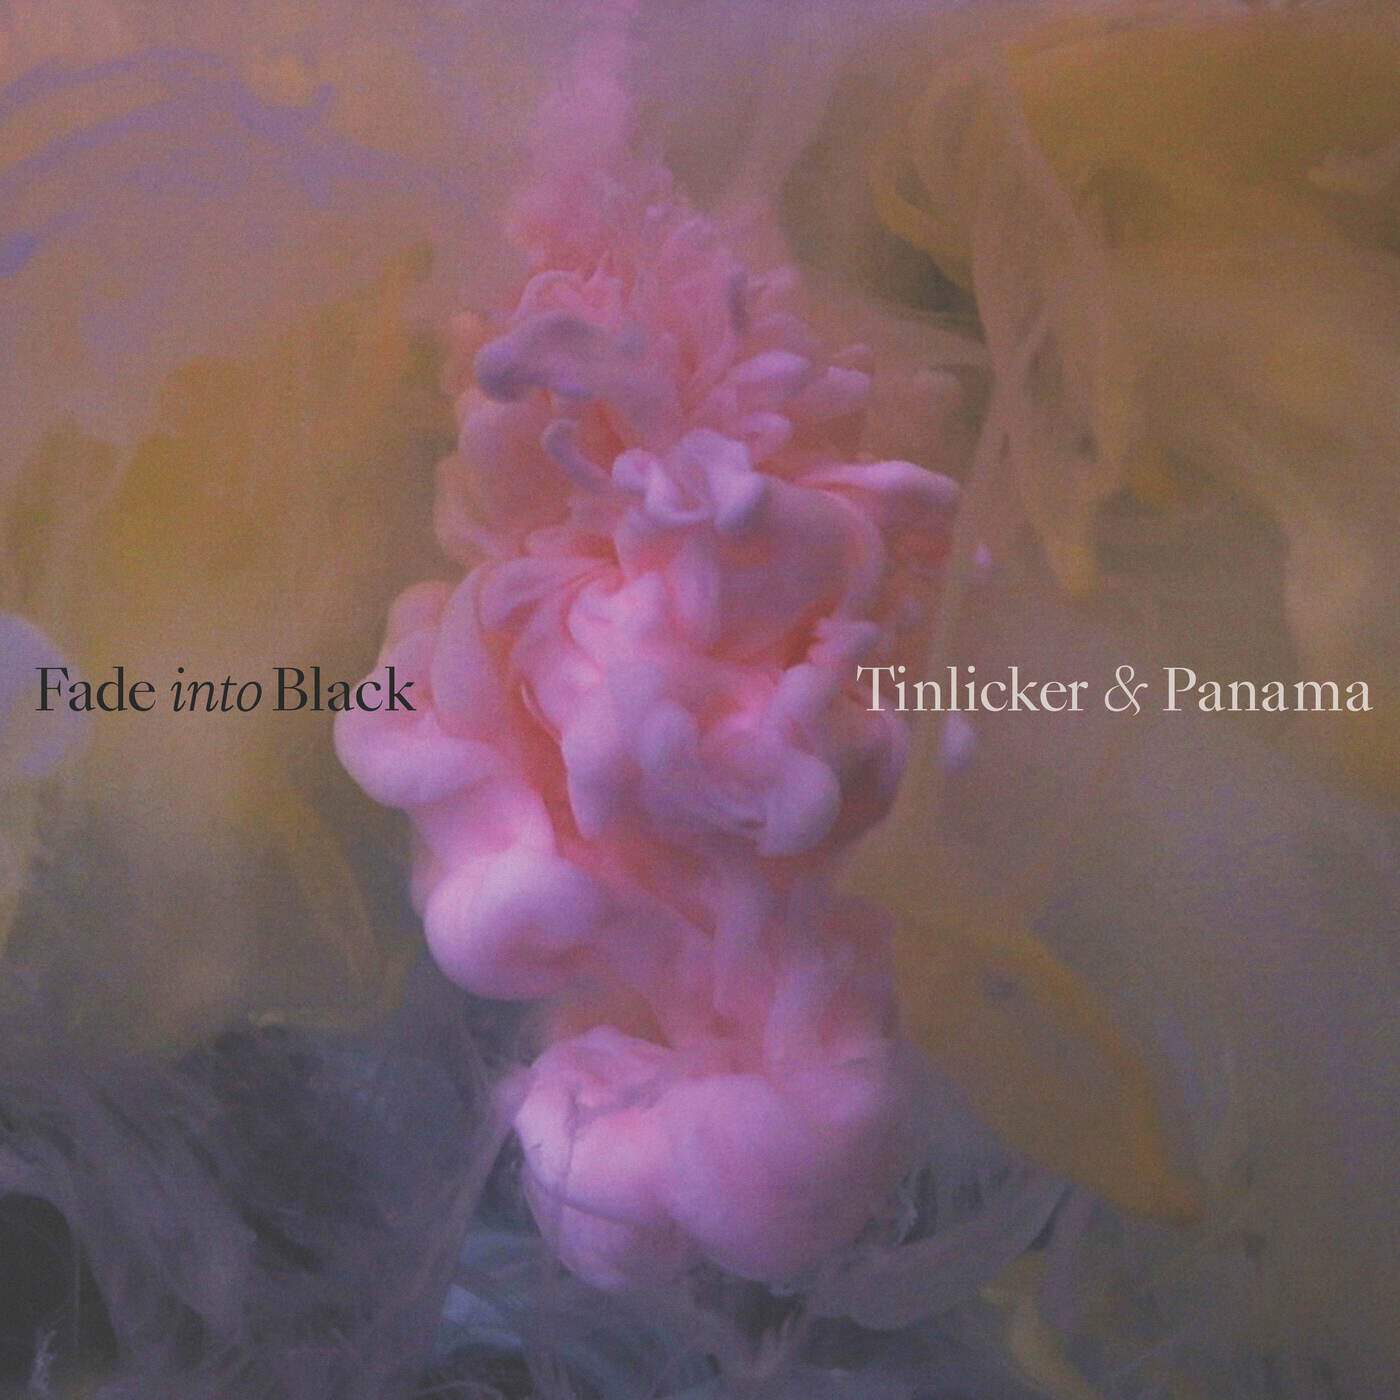 Download Panama, Tinlicker - Fade Into Black (Extended Club Mix) on Electrobuzz